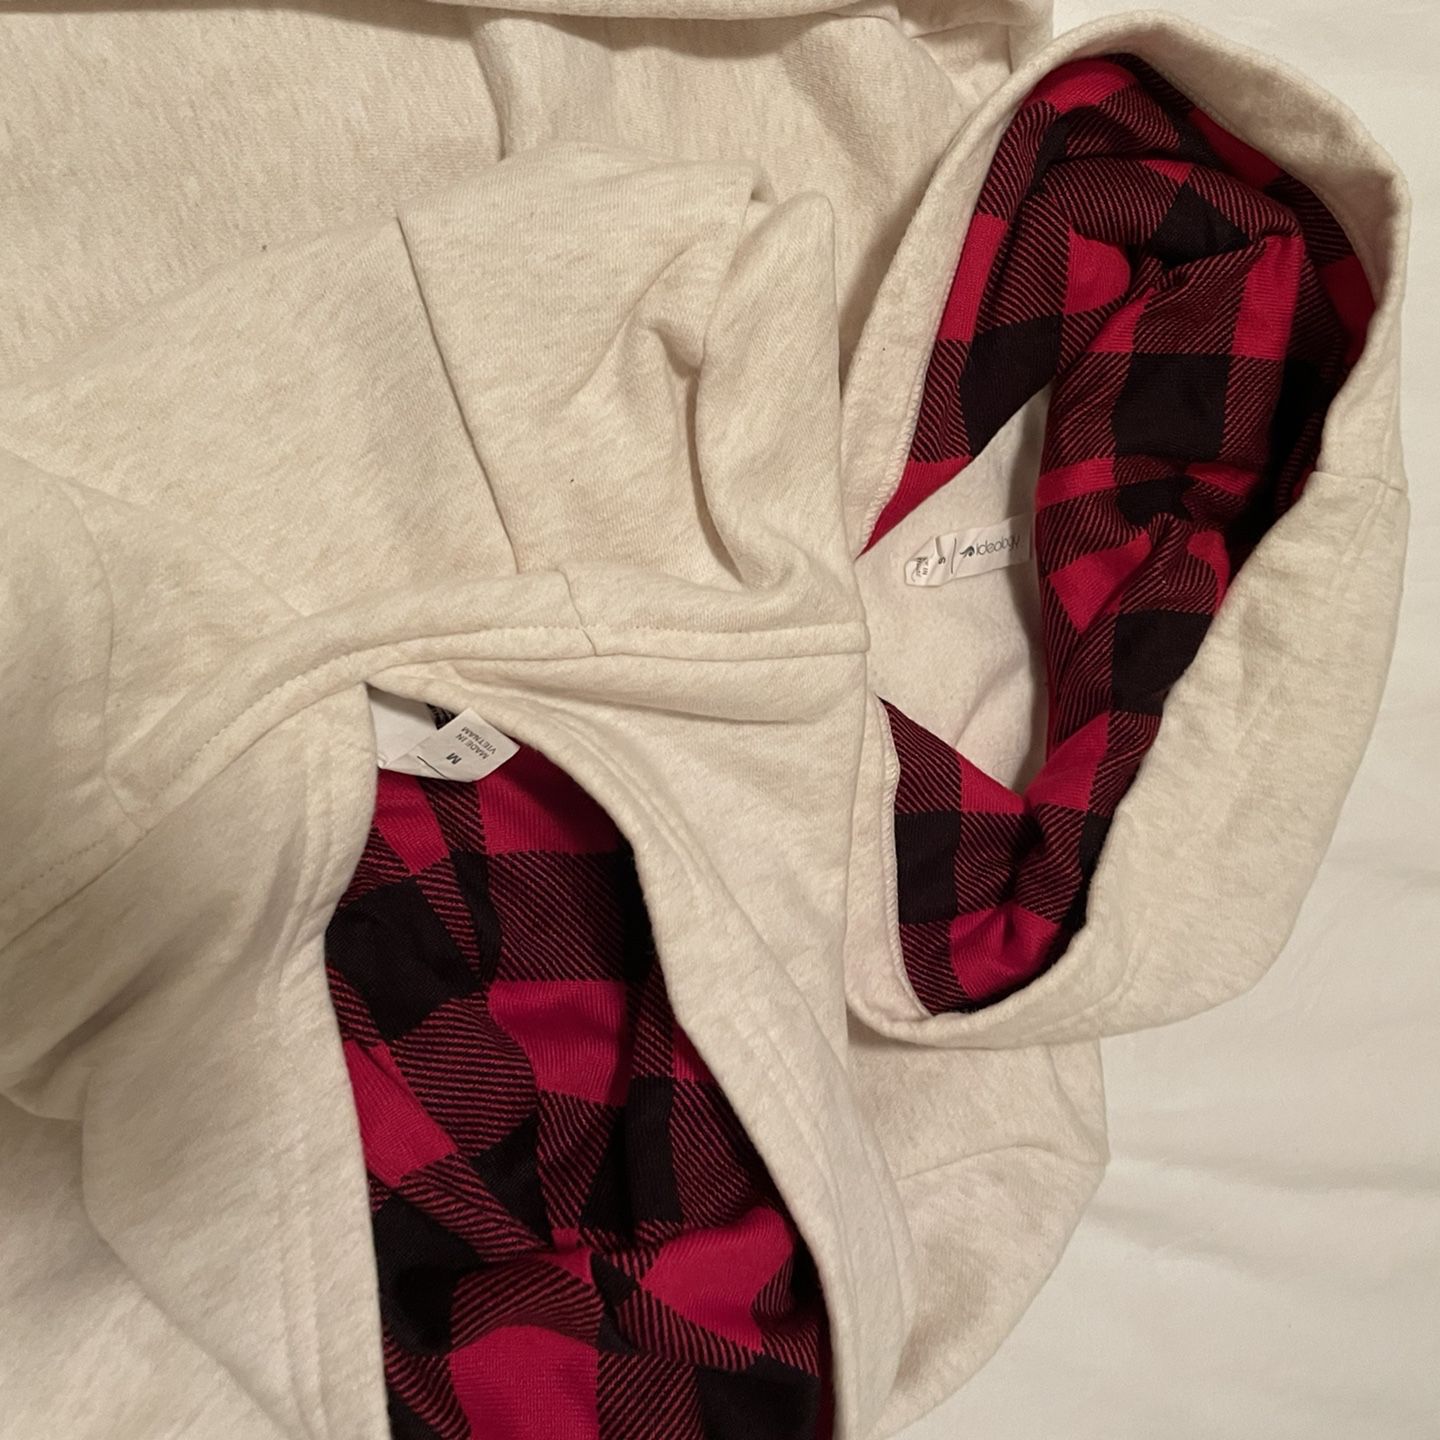 Chanel Dog Hoodie for Sale in Independence, MO - OfferUp